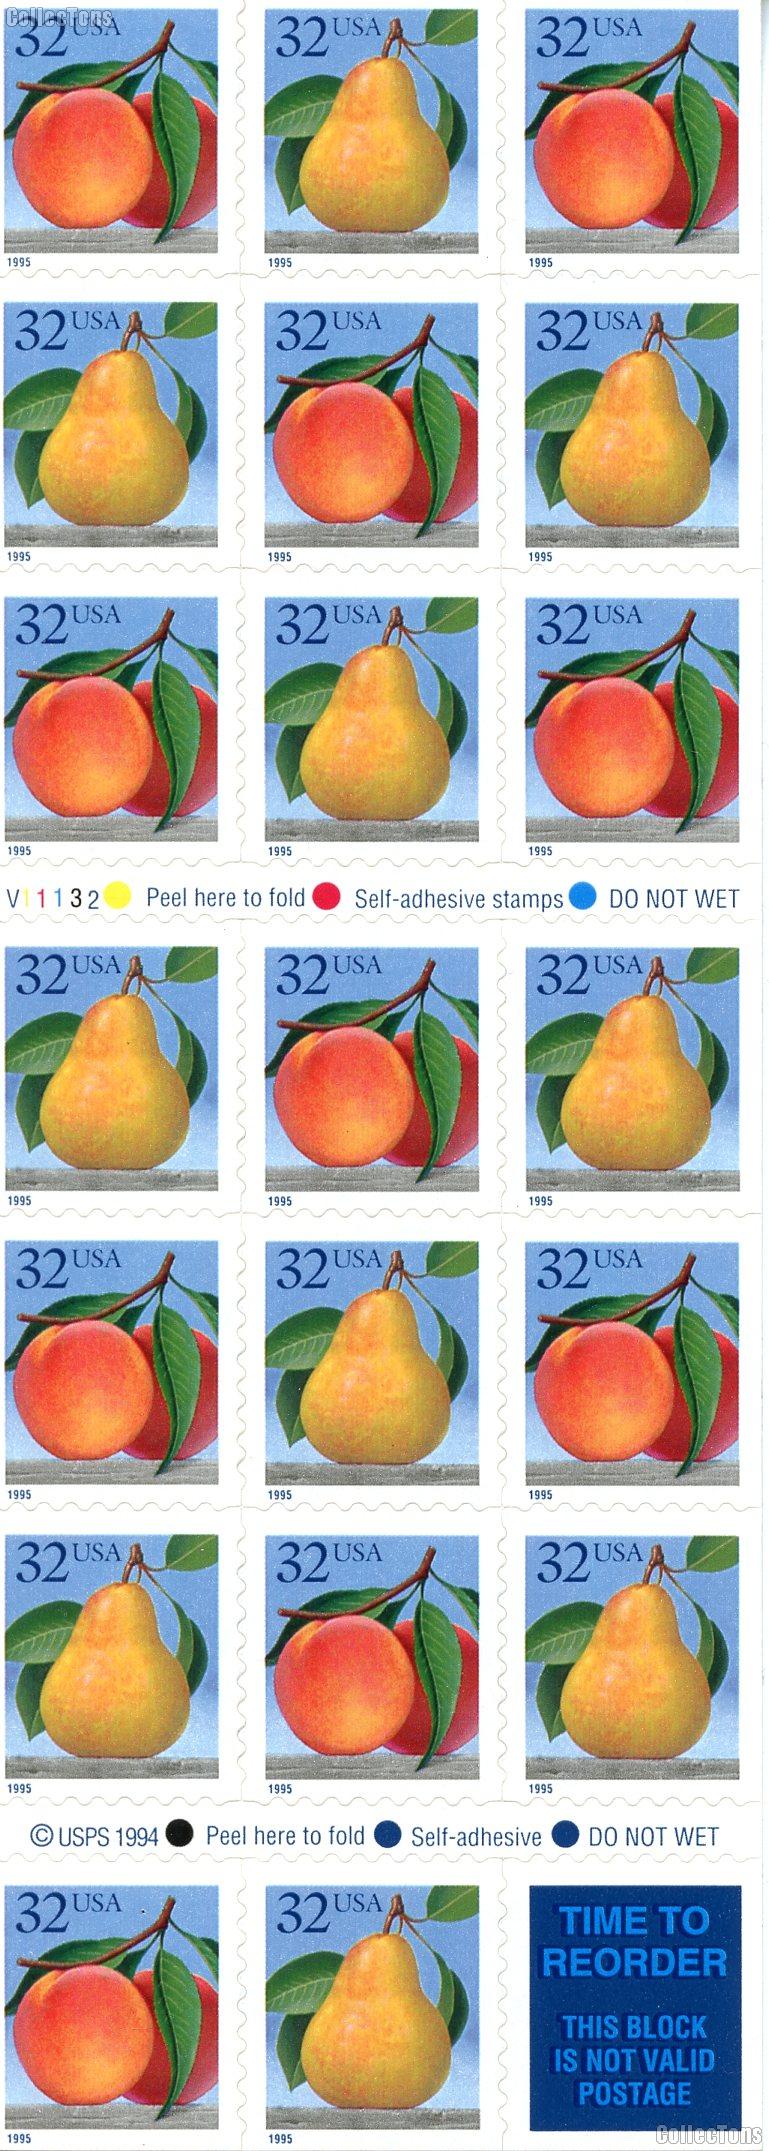 1995 Peaches & Pears US Postage Stamp MNH Booklet of 20 Scott #2494a